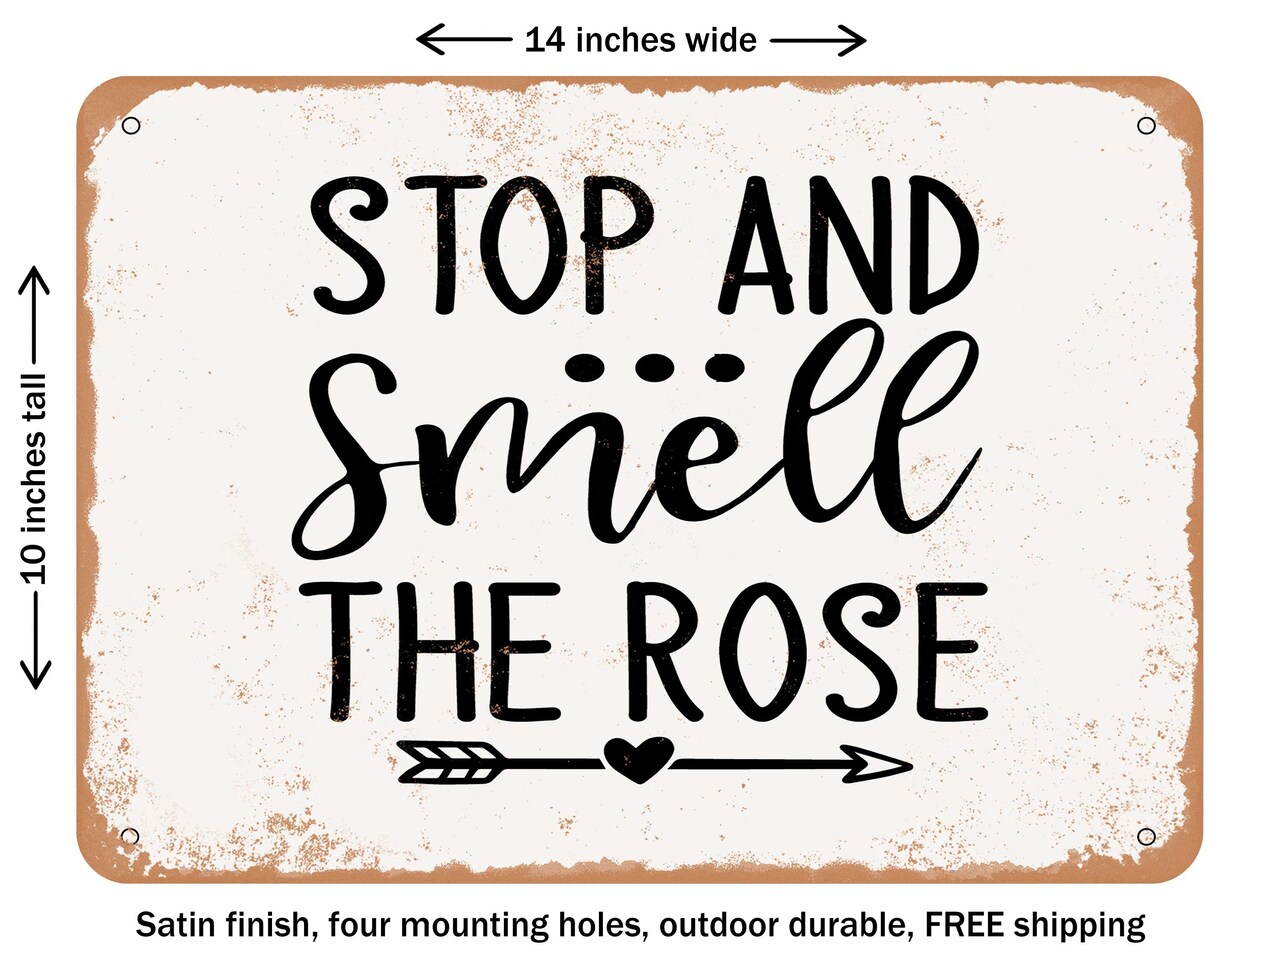 DECORATIVE METAL SIGN - Stop and Smell the Rose - 2 - Vintage Rusty Look